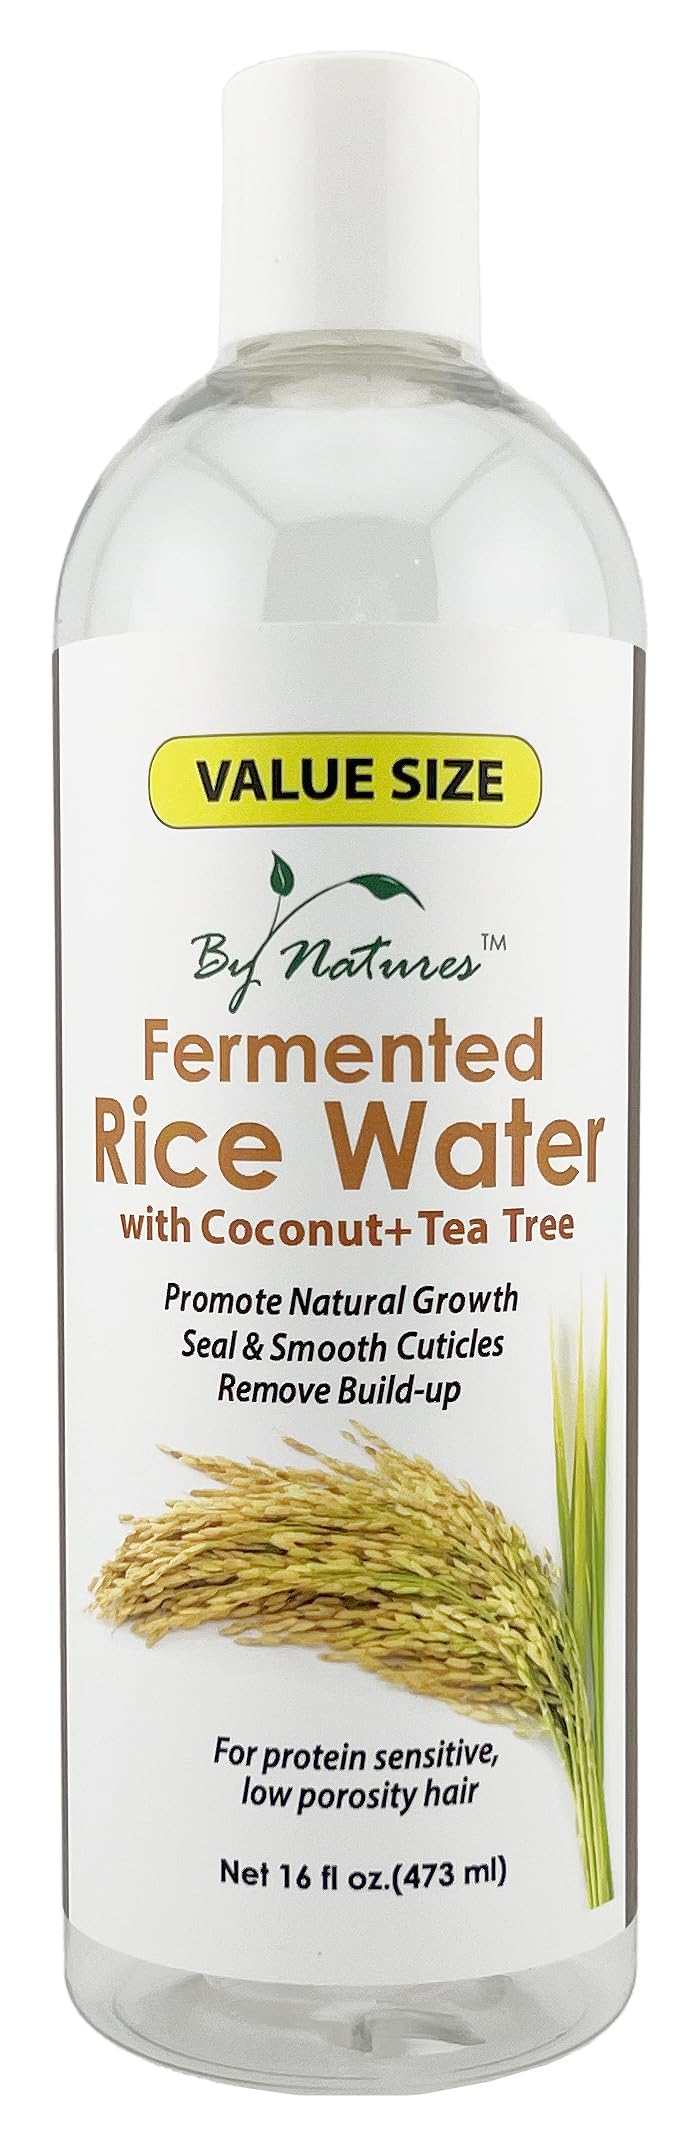 By Natures Fermented Rice Water With Coconut + Tea Tree 16.0 Fl Oz (Pack of 1)